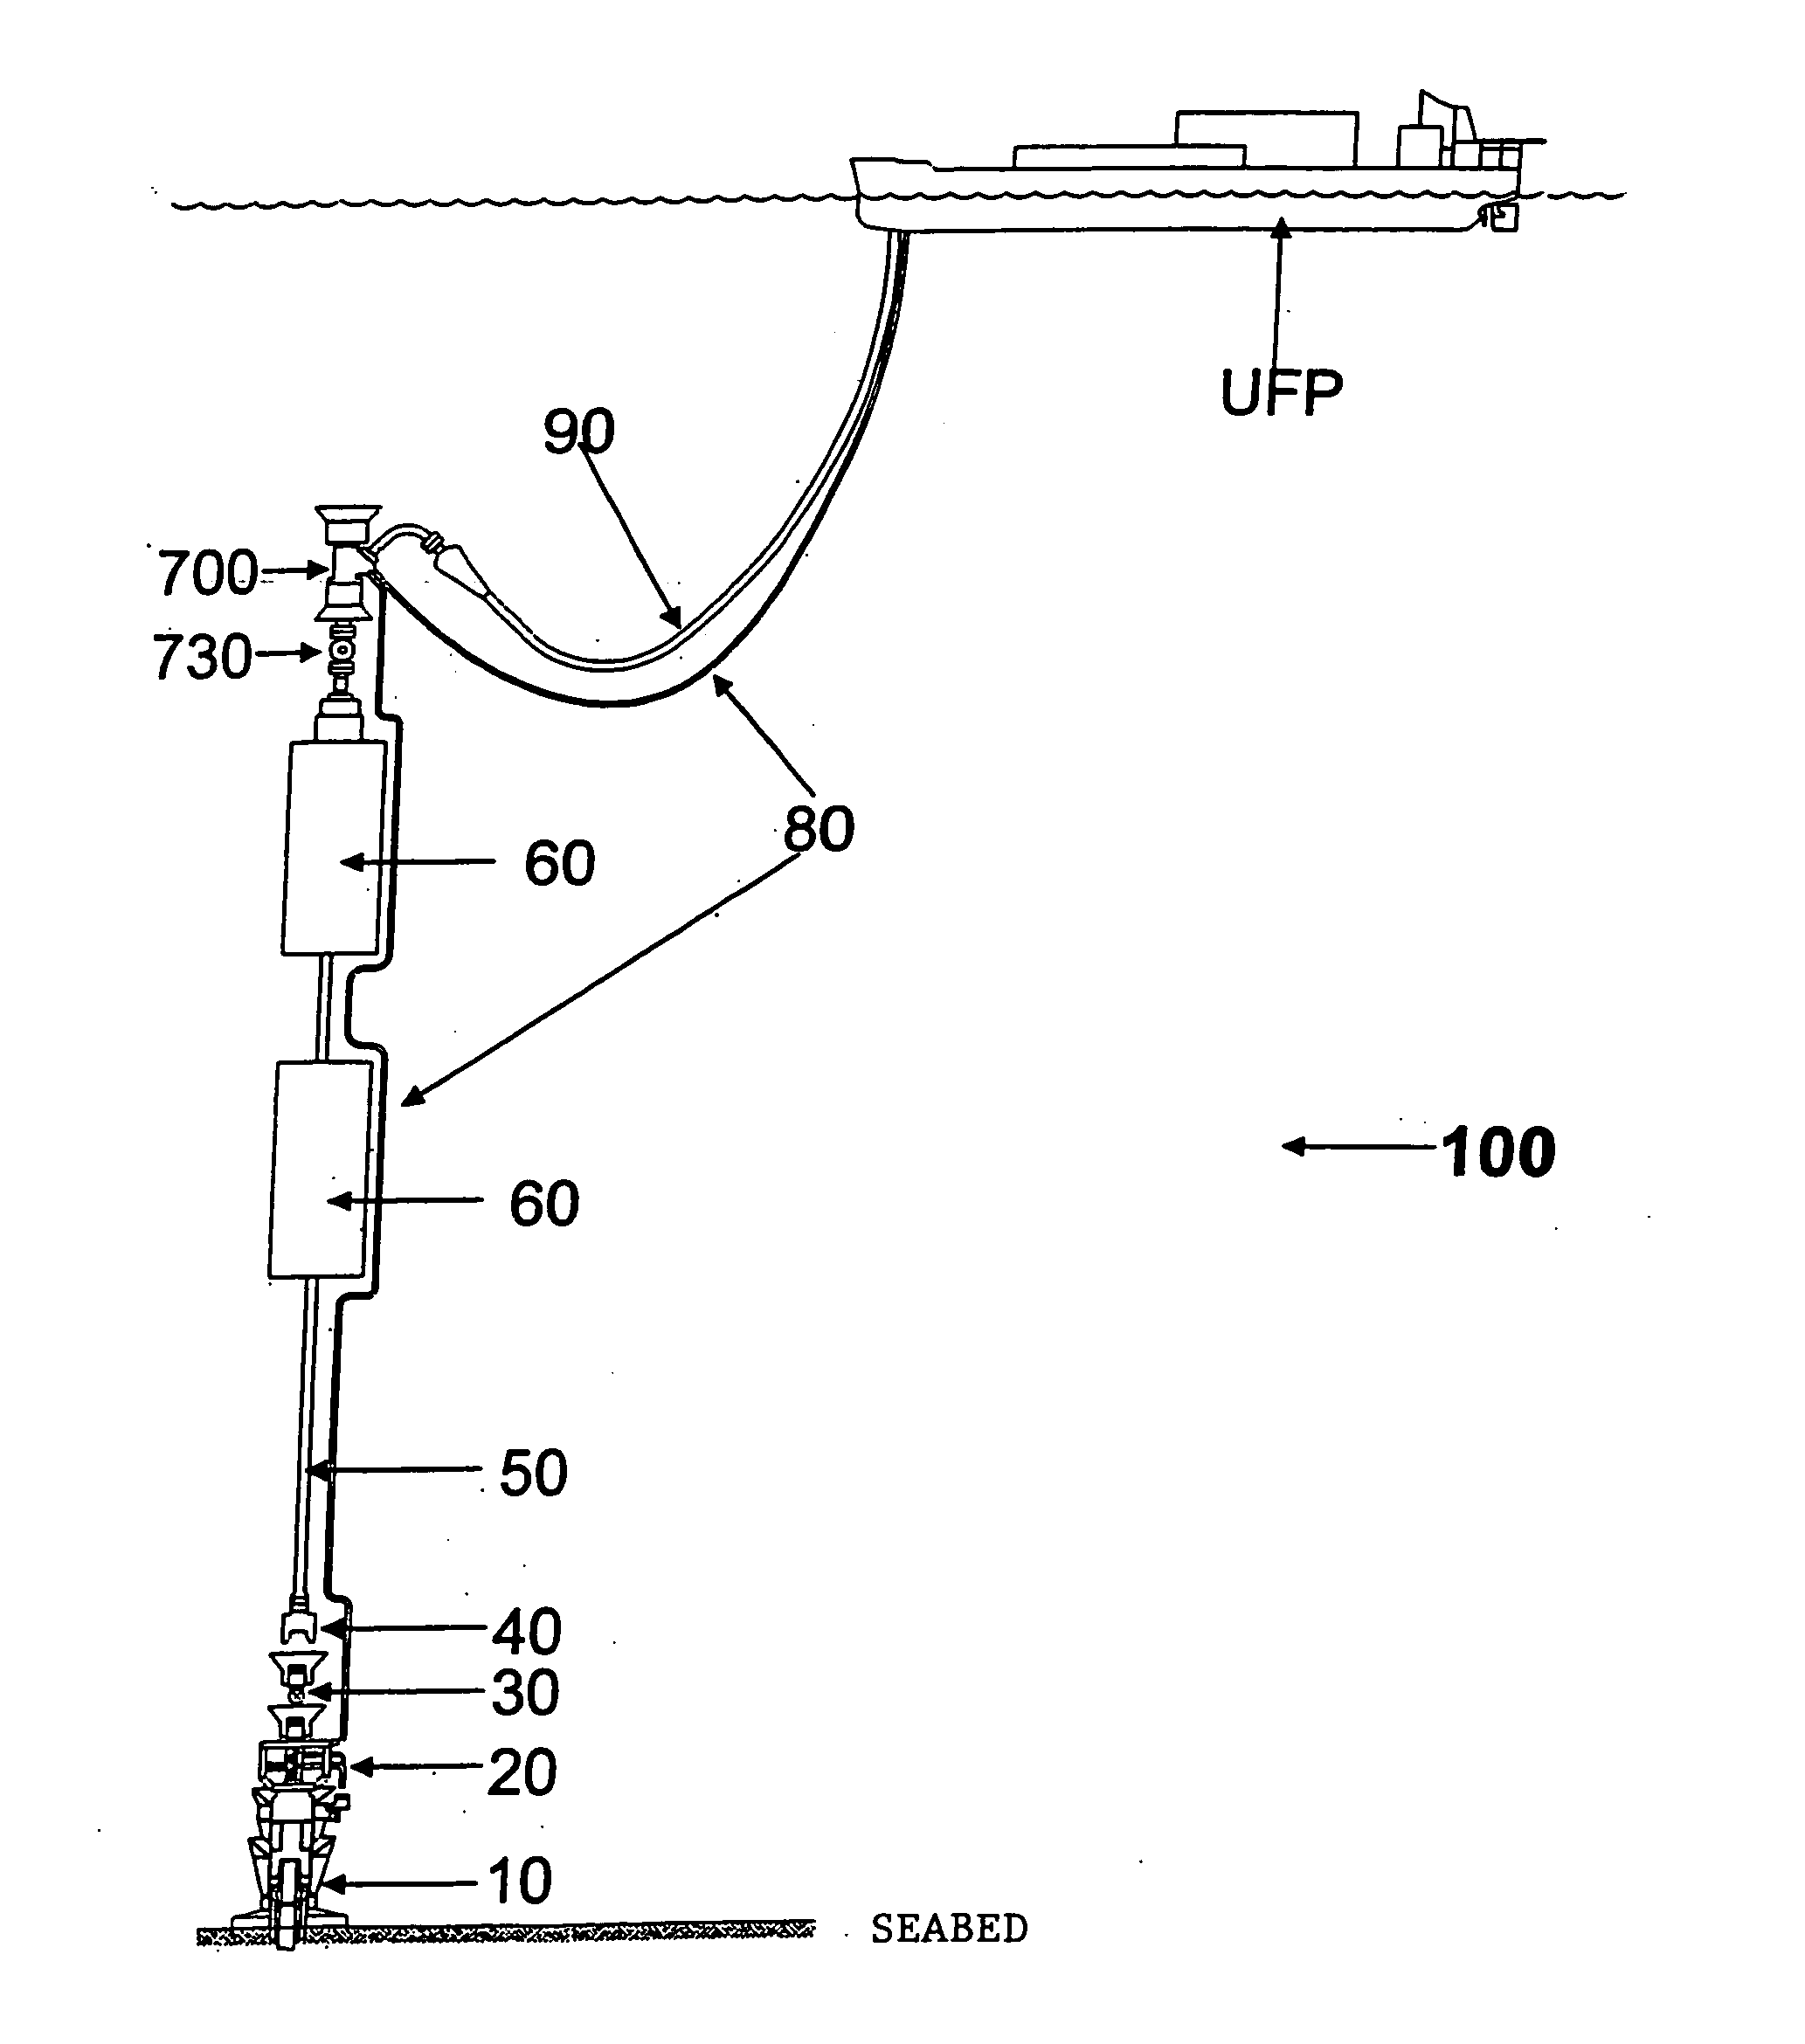 Self-supported riser system and method of installing same